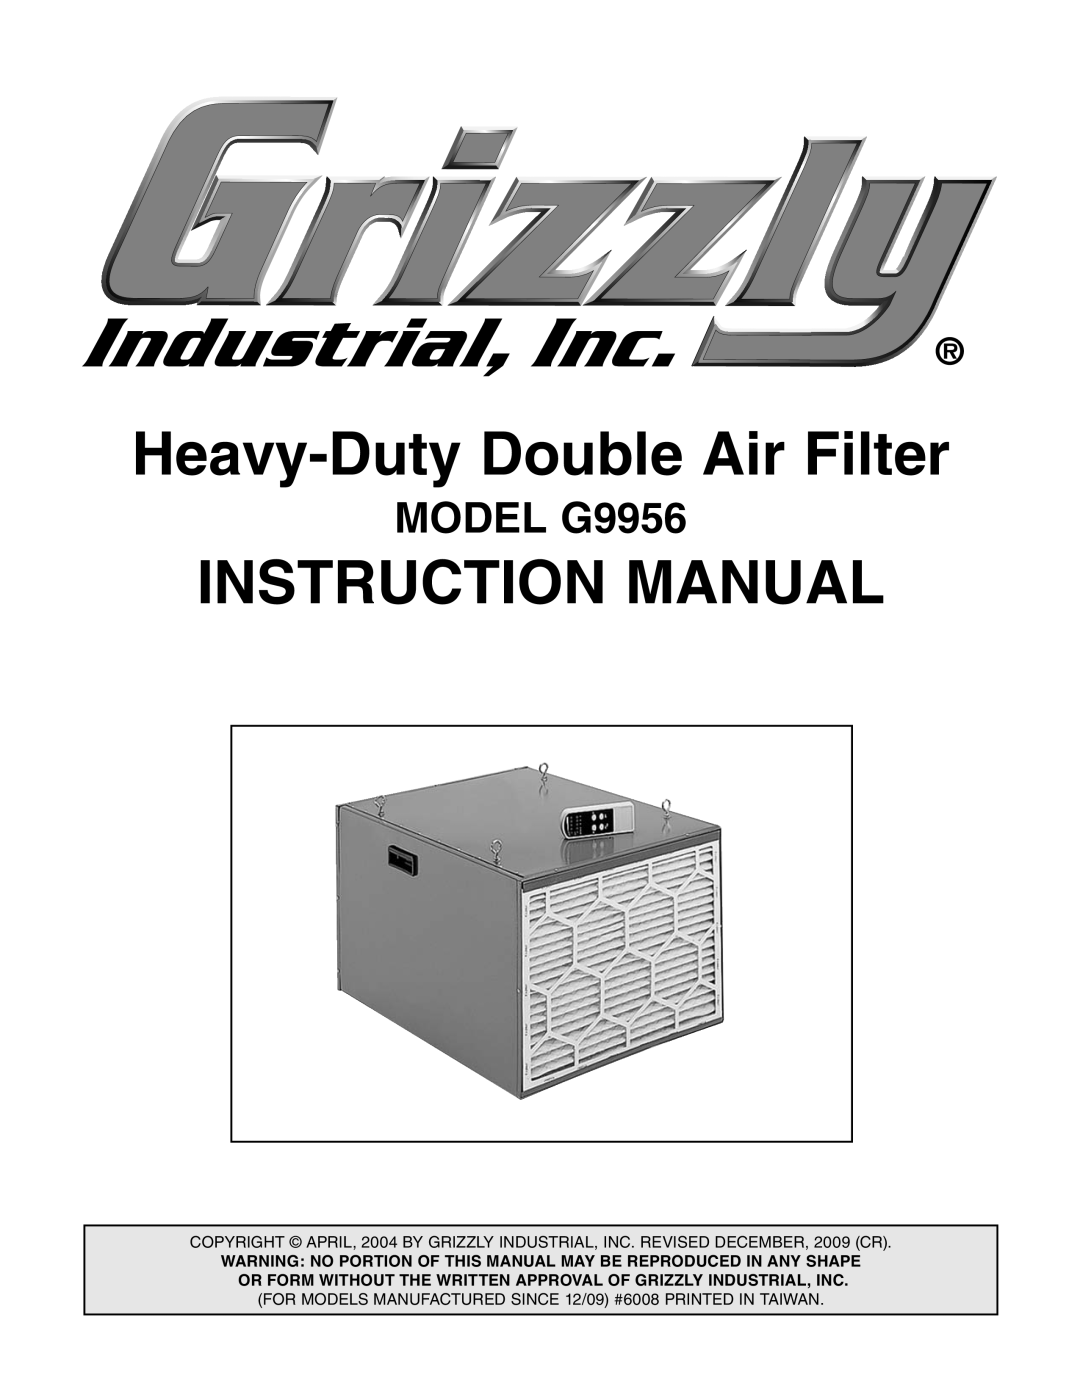 Grizzly instruction manual MODEL G9956, Heavy-DutyDouble Air Filter, COPYRIGHT APRIL, 2004 BY GRIZZLY INDUSTRIAL, INC 